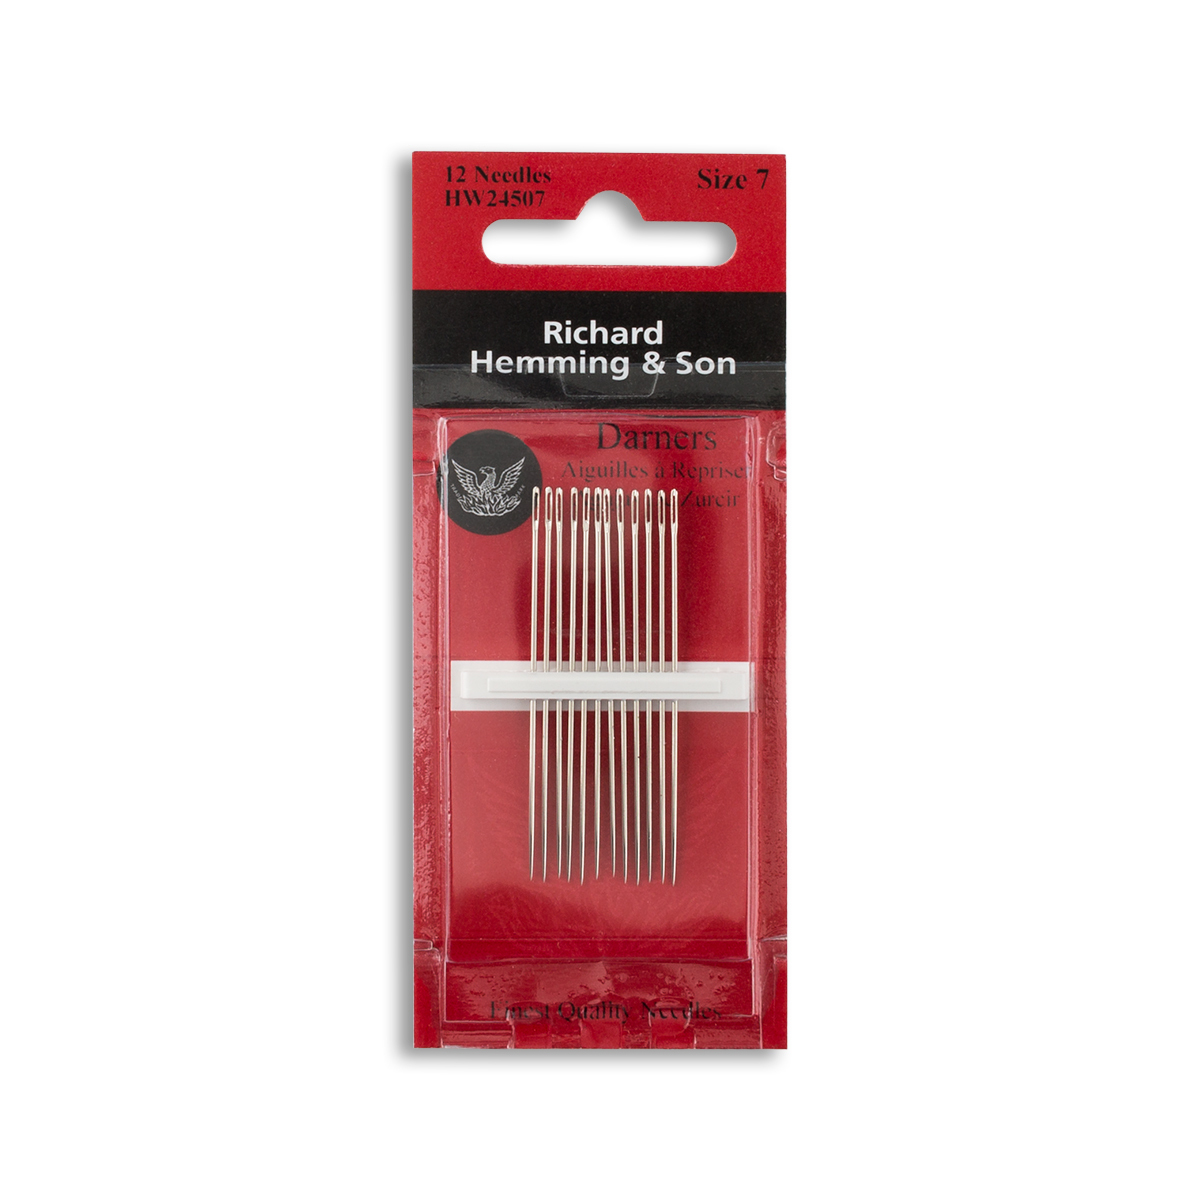 12pcs/set Large Eye Hand Sewing Needles Set With 3 Sizes, Includes Smooth  Brown Wooden Needle Threader